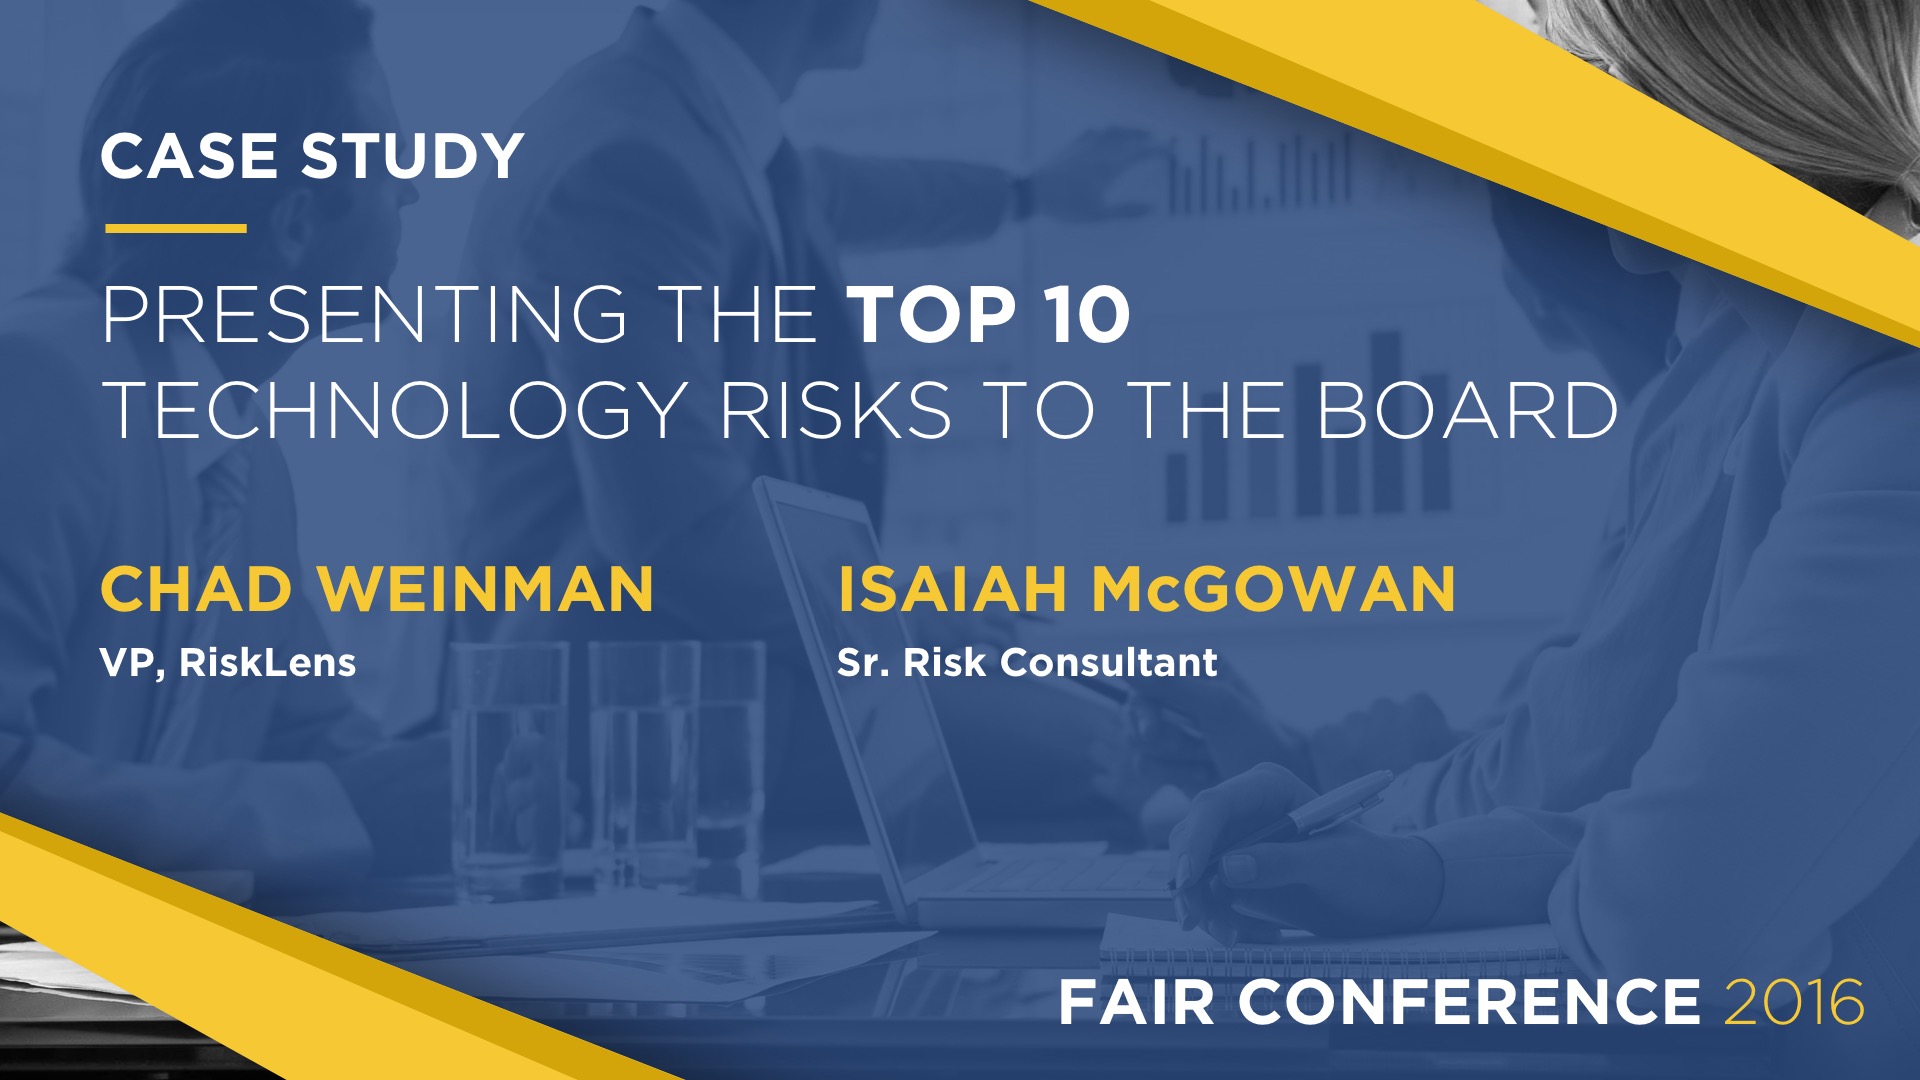 FAIR Conference 2016 - The Top 10 Risks To The Board.jpg